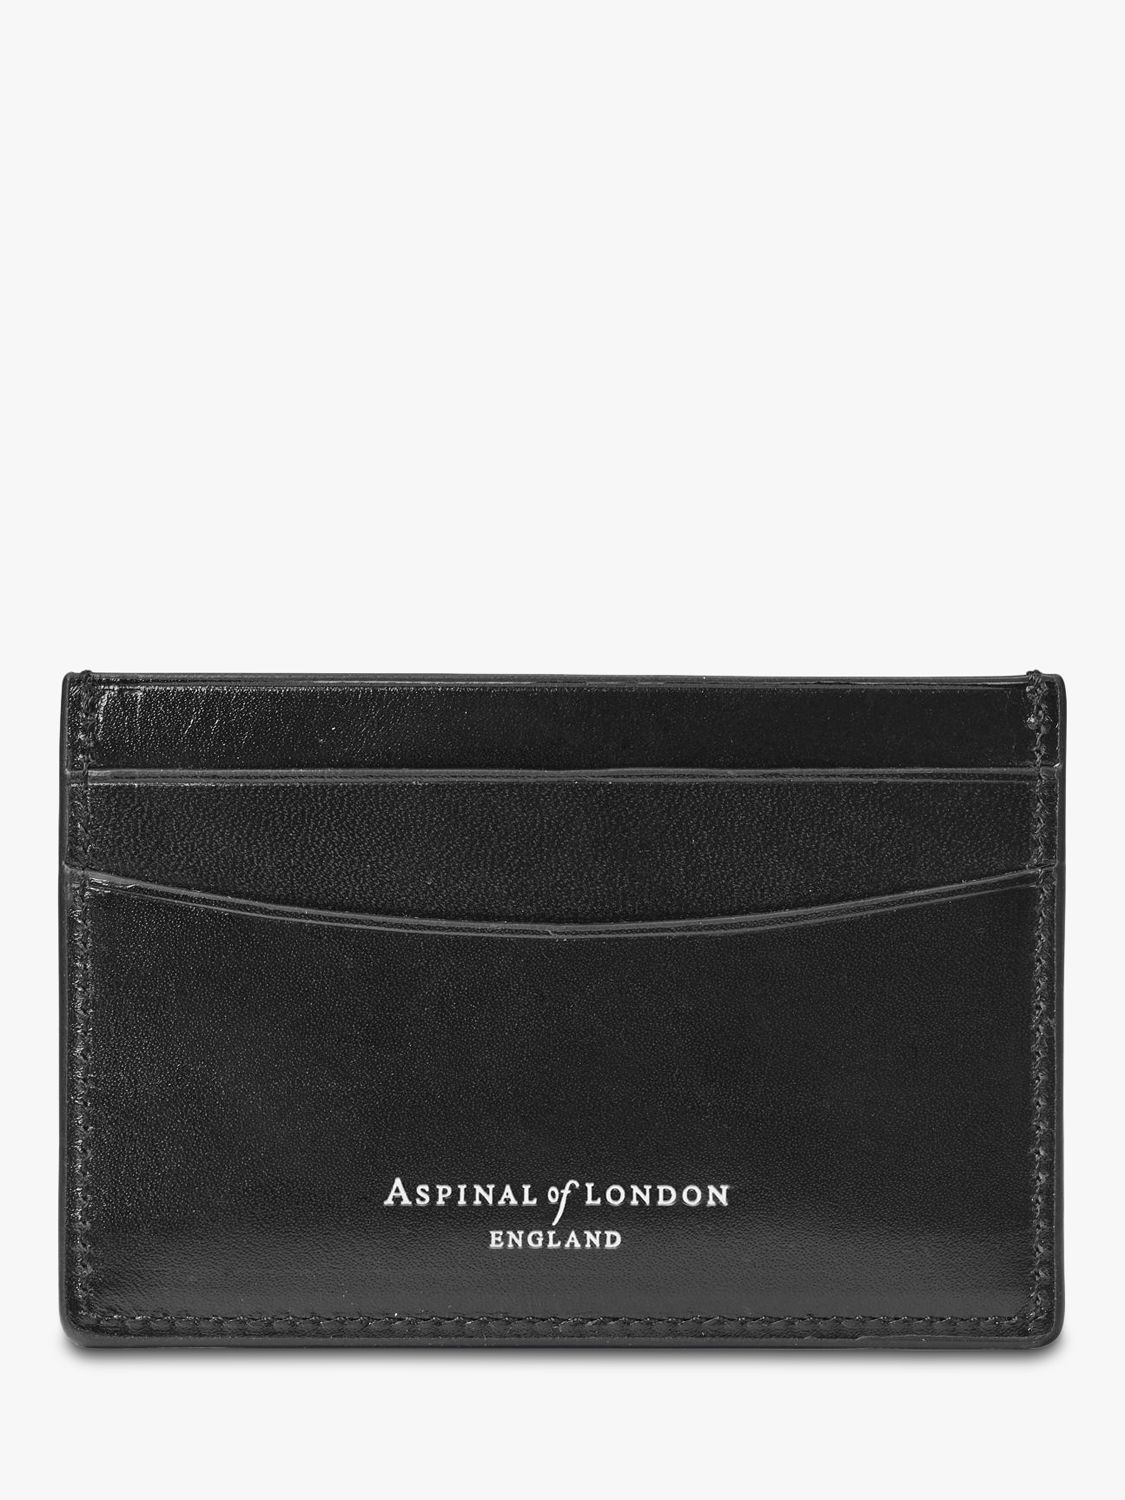 Aspinal of London Smooth Leather Slim Credit Card Case, Black